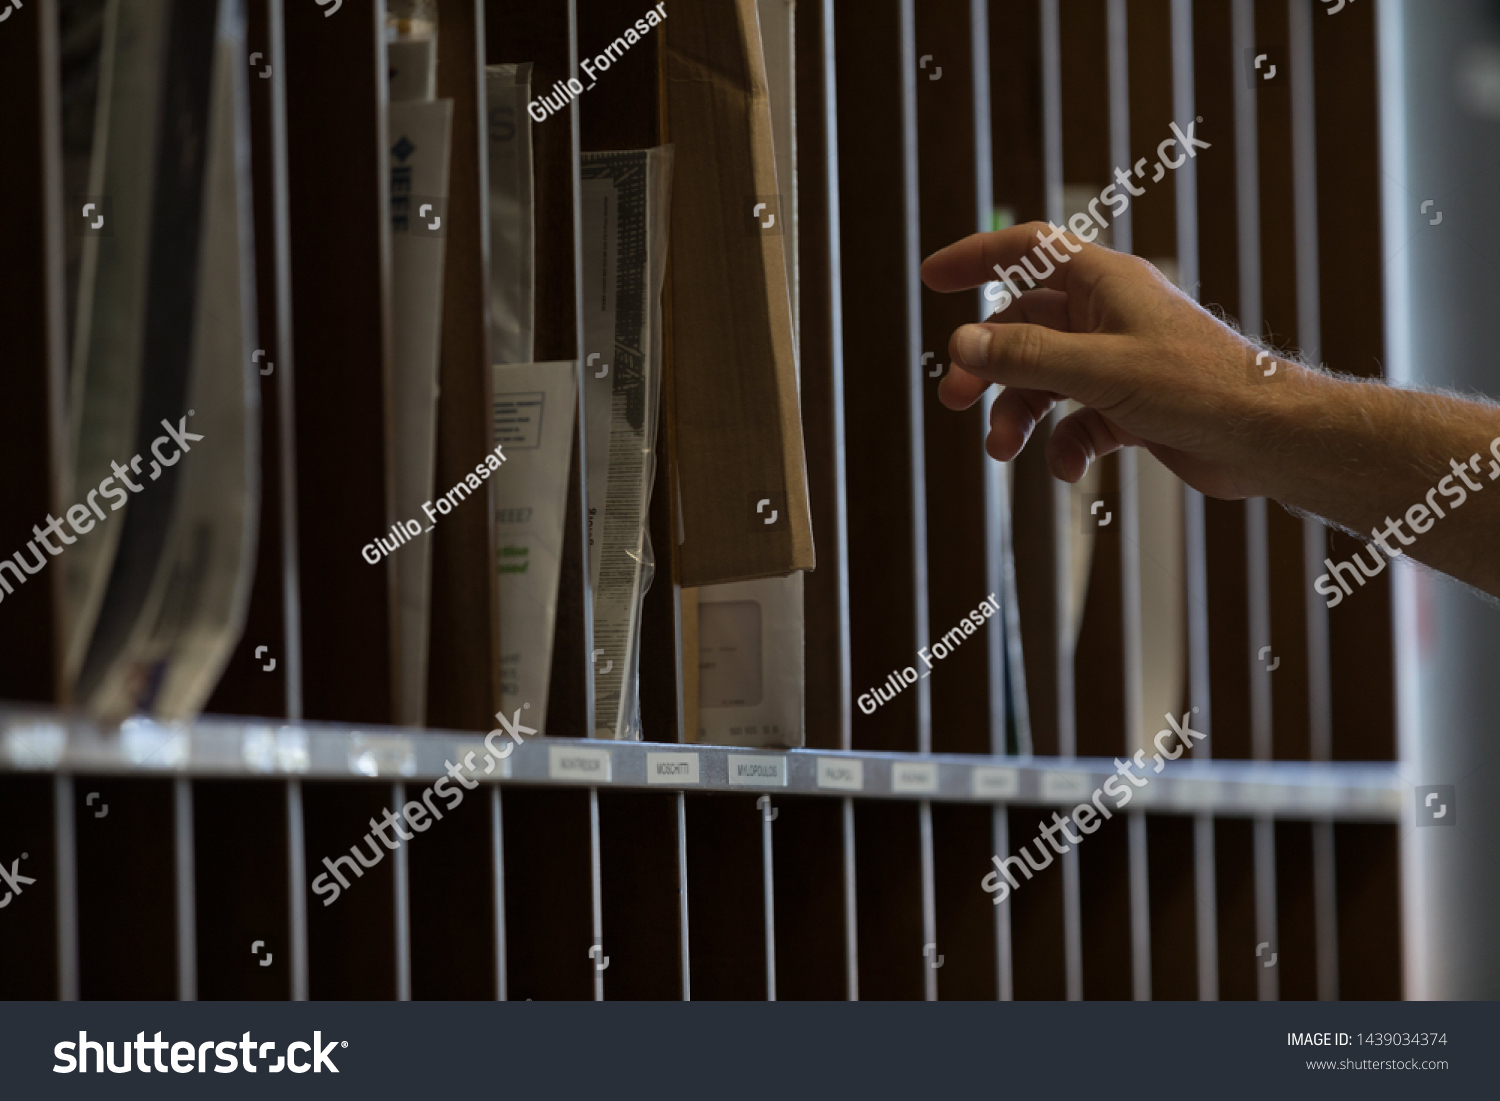 Male hand reaching for sorted post or mail in pigeon holes in a postal depot in a corporate business #1439034374